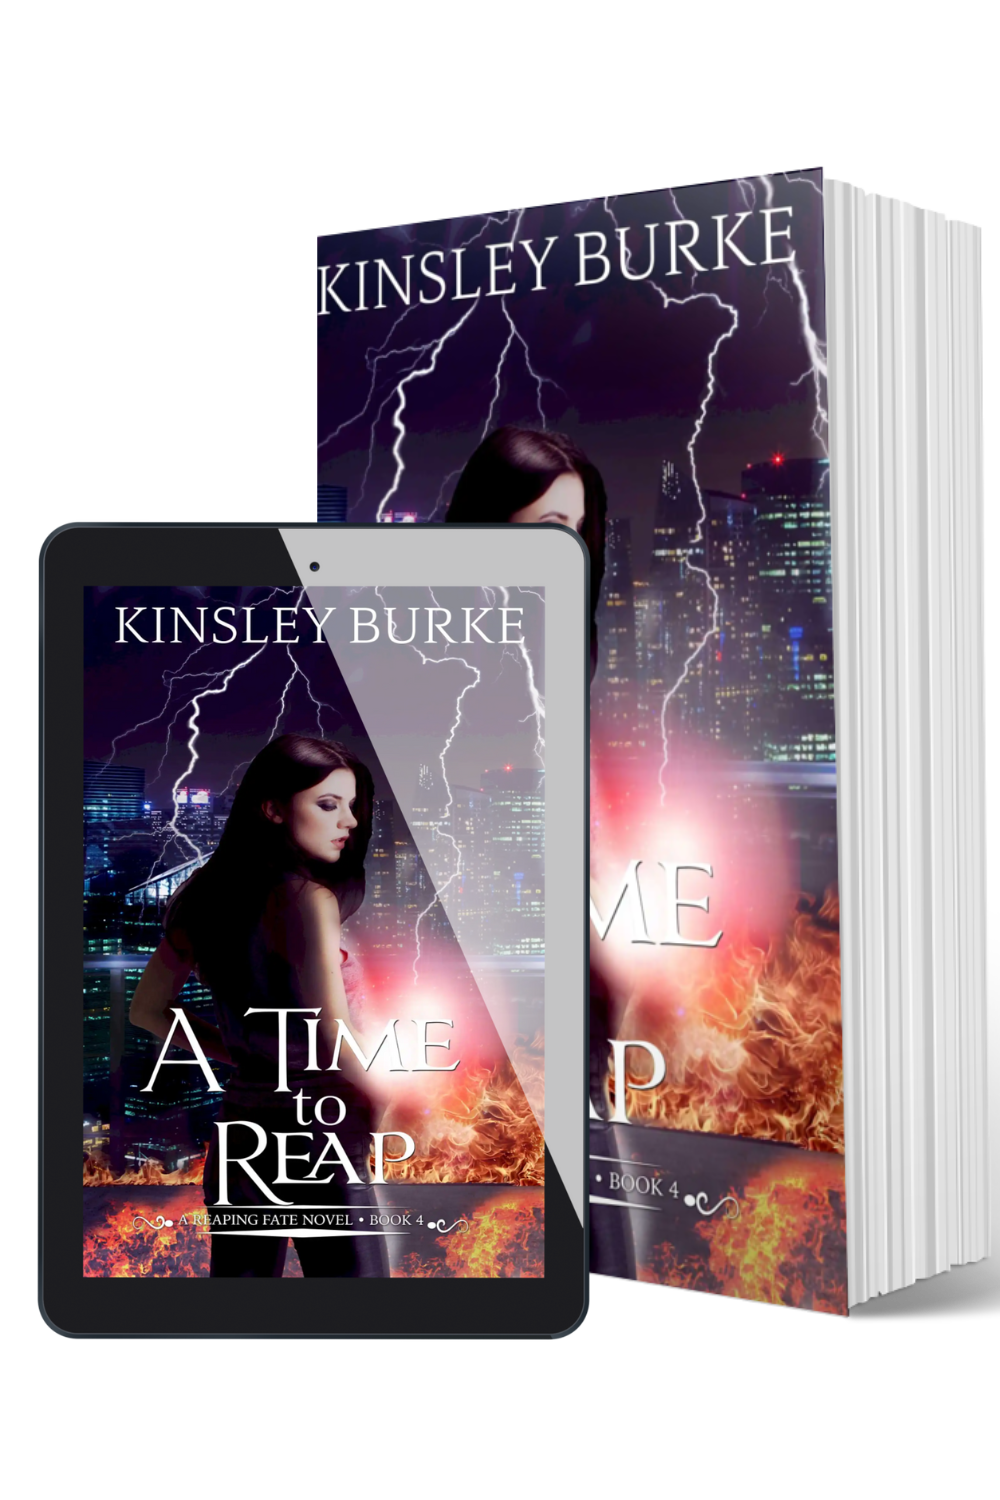 Cover image of A Time to Reap by Kinsley Burke